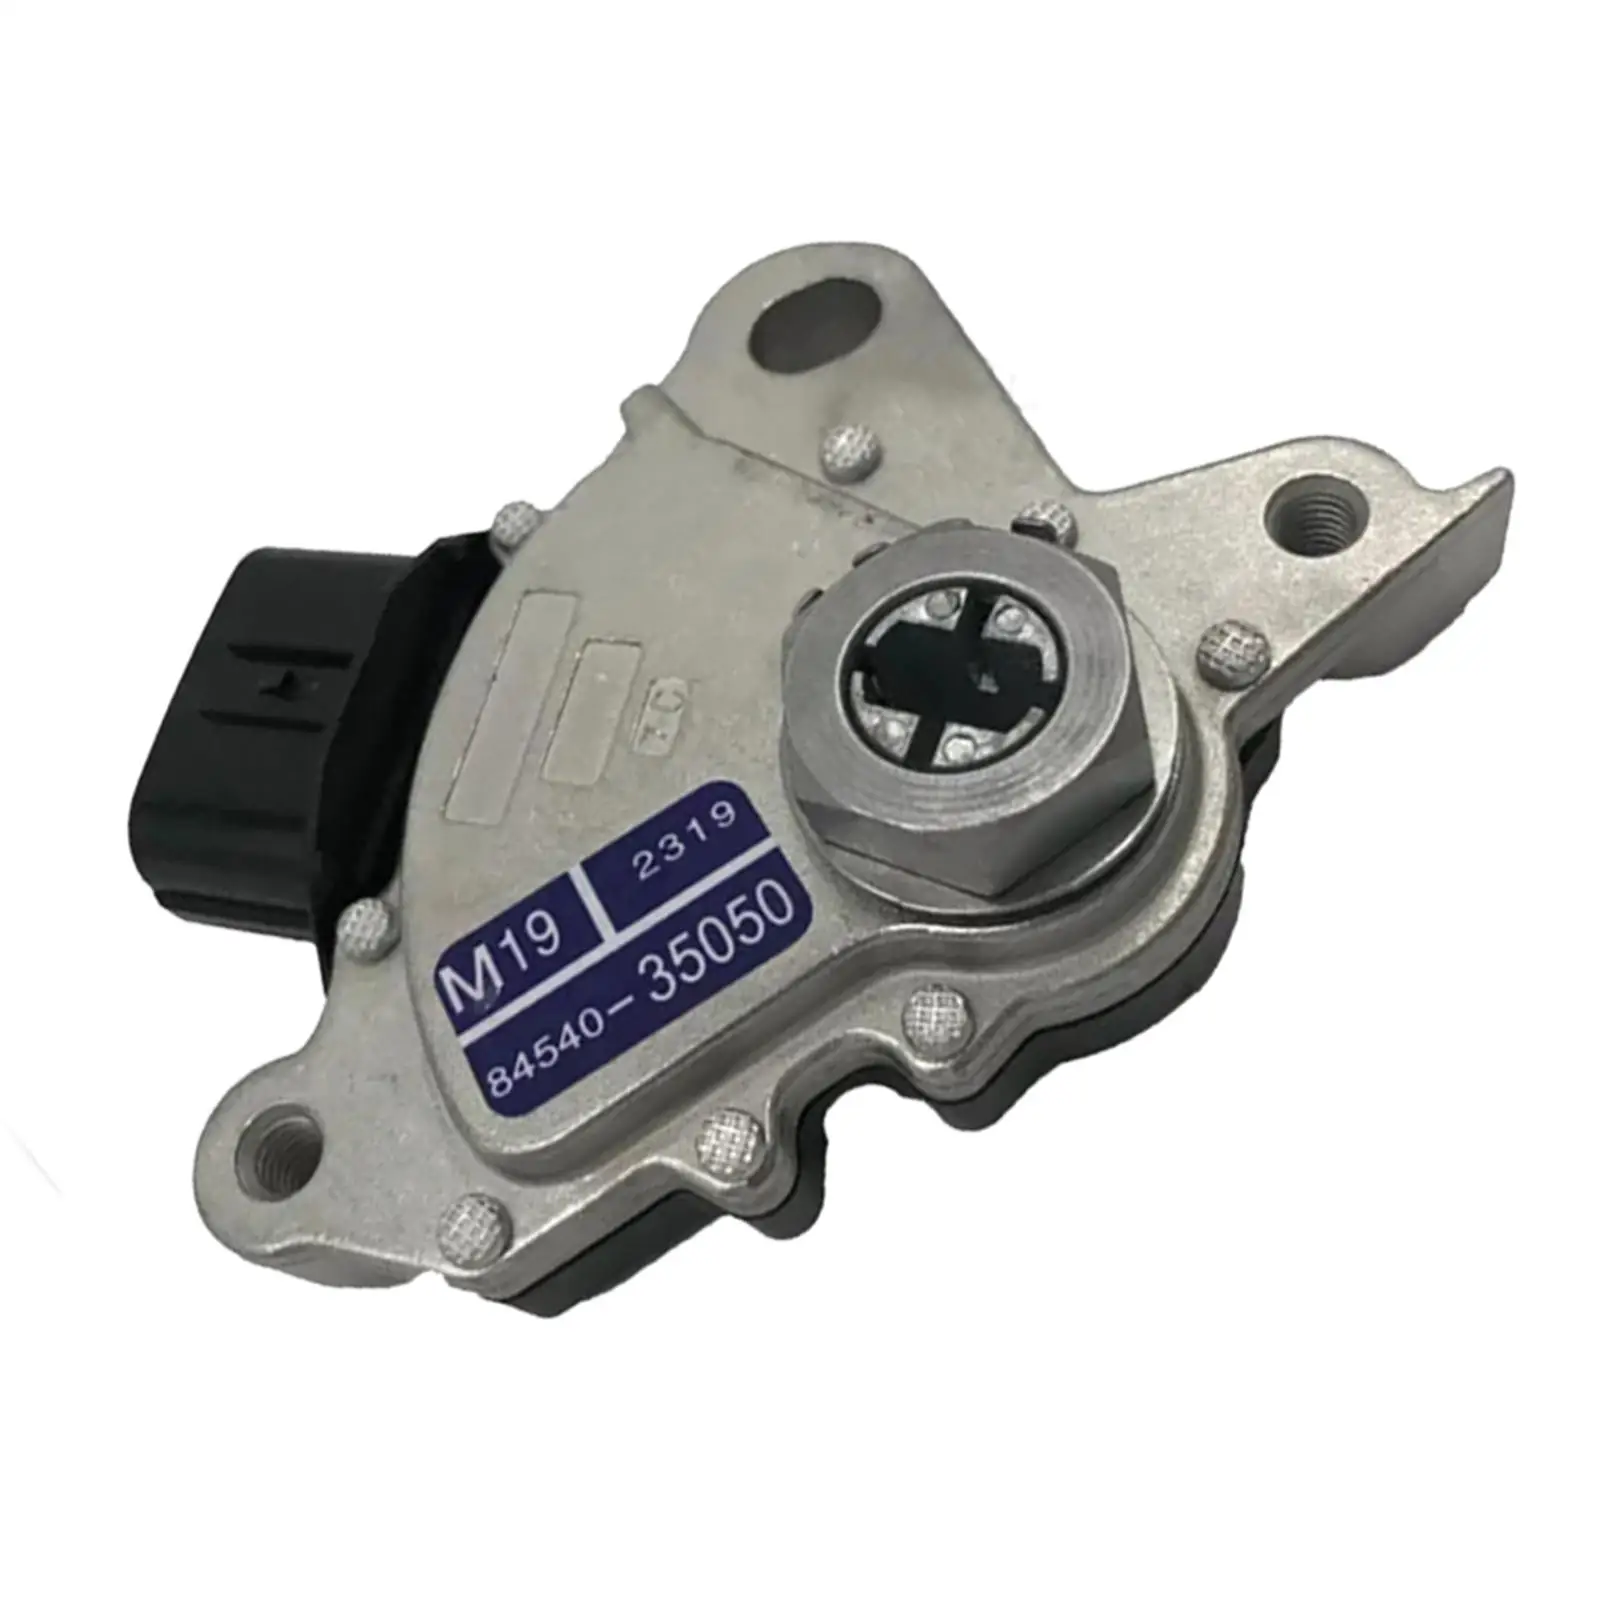 SW4984 Automatic Transmission Neutral Start Switch for Toyota Tacoma Accessory Easy to Install Automotive Premium